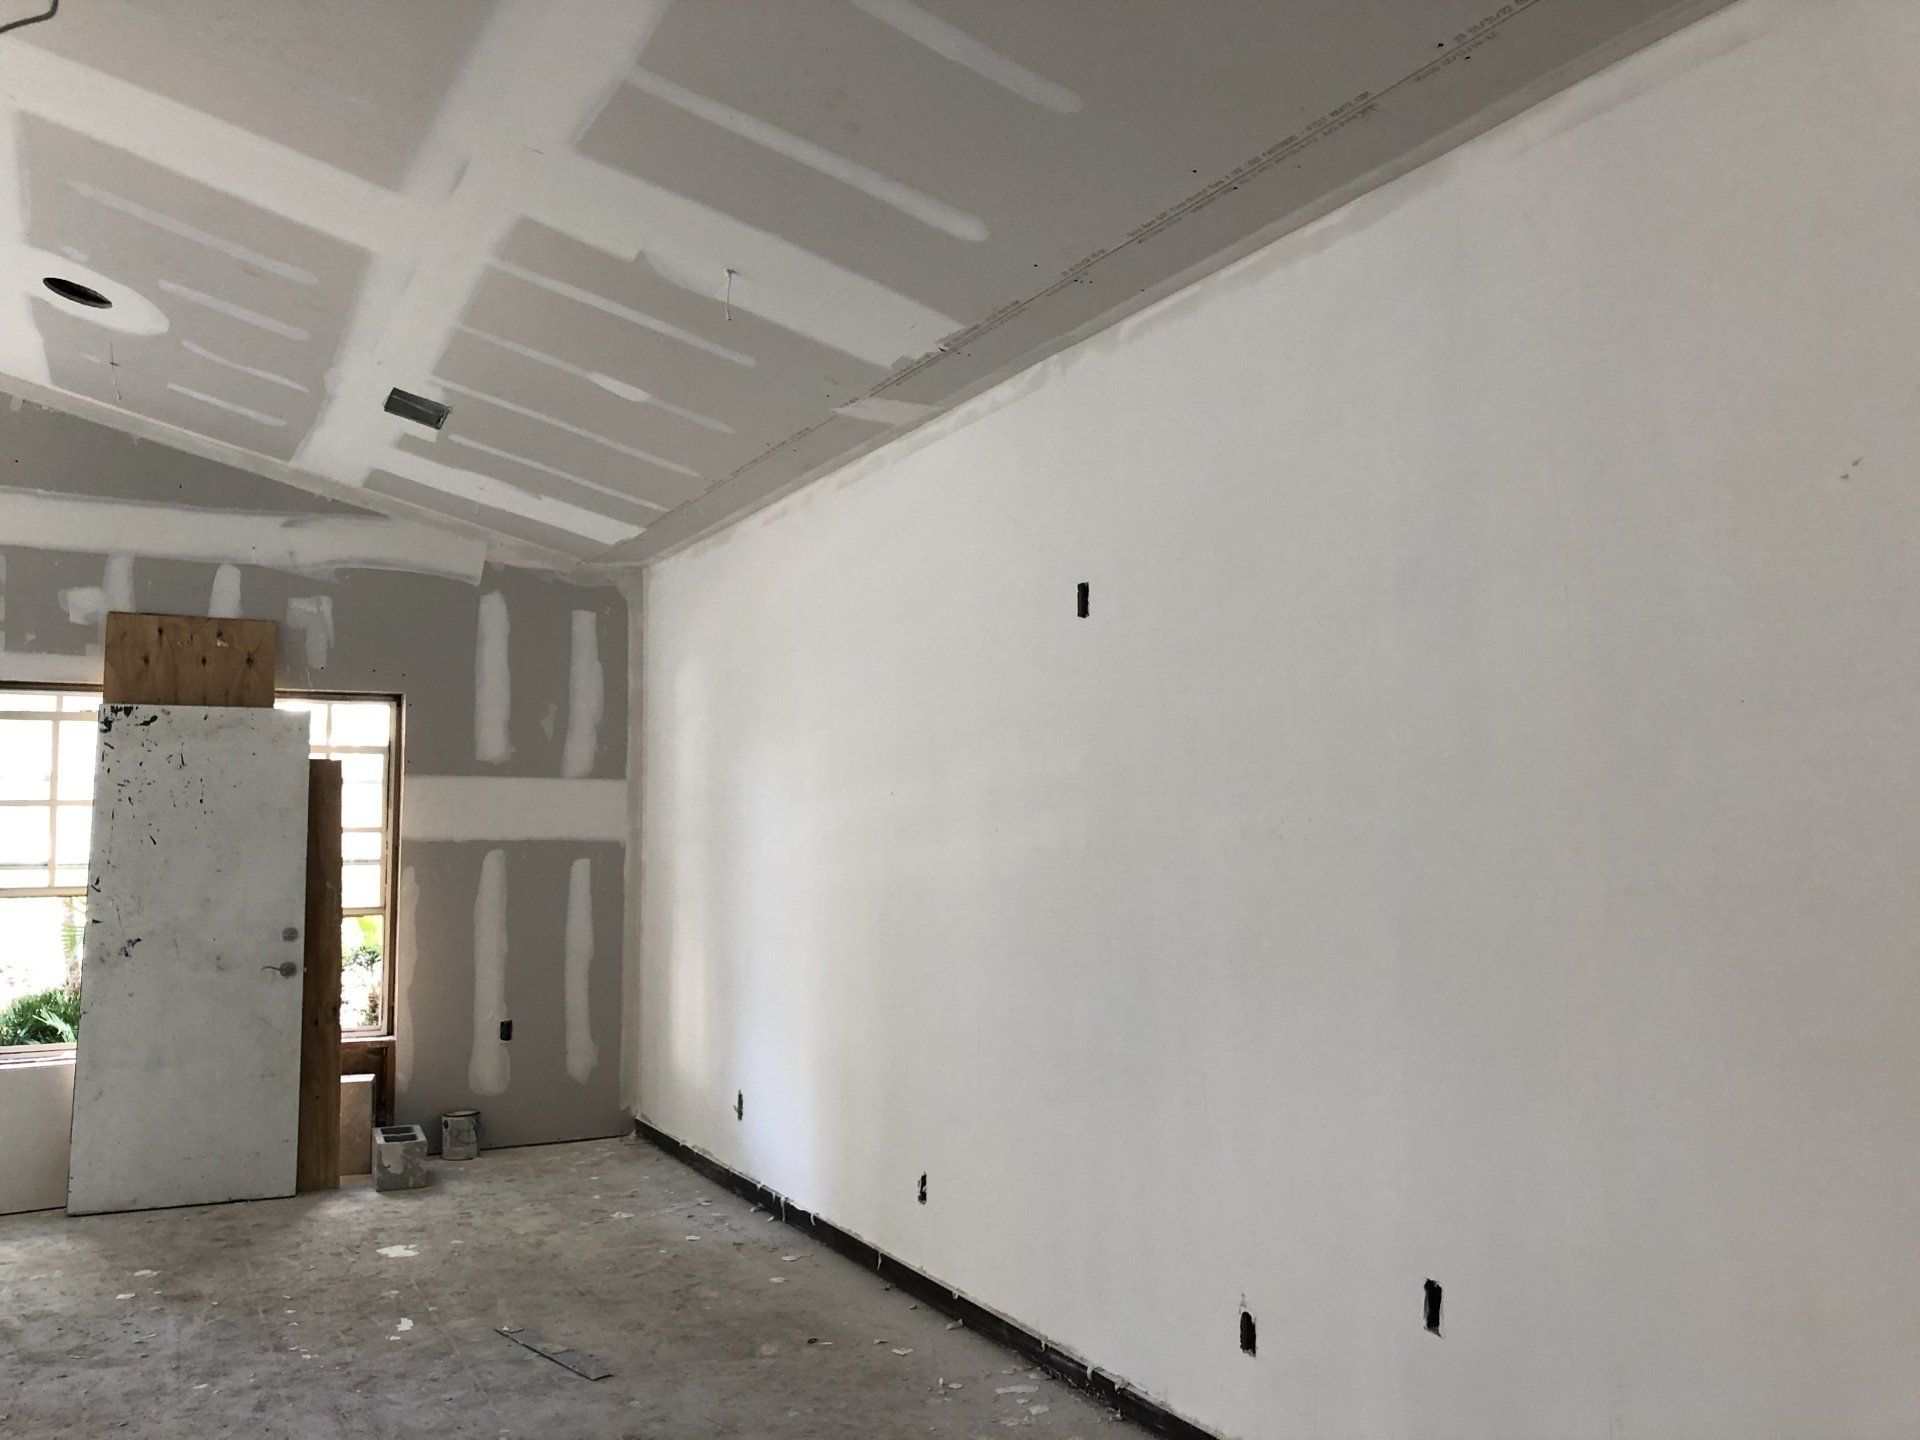 recreation room during remodel with new drywall after space had been stripped down to the studds